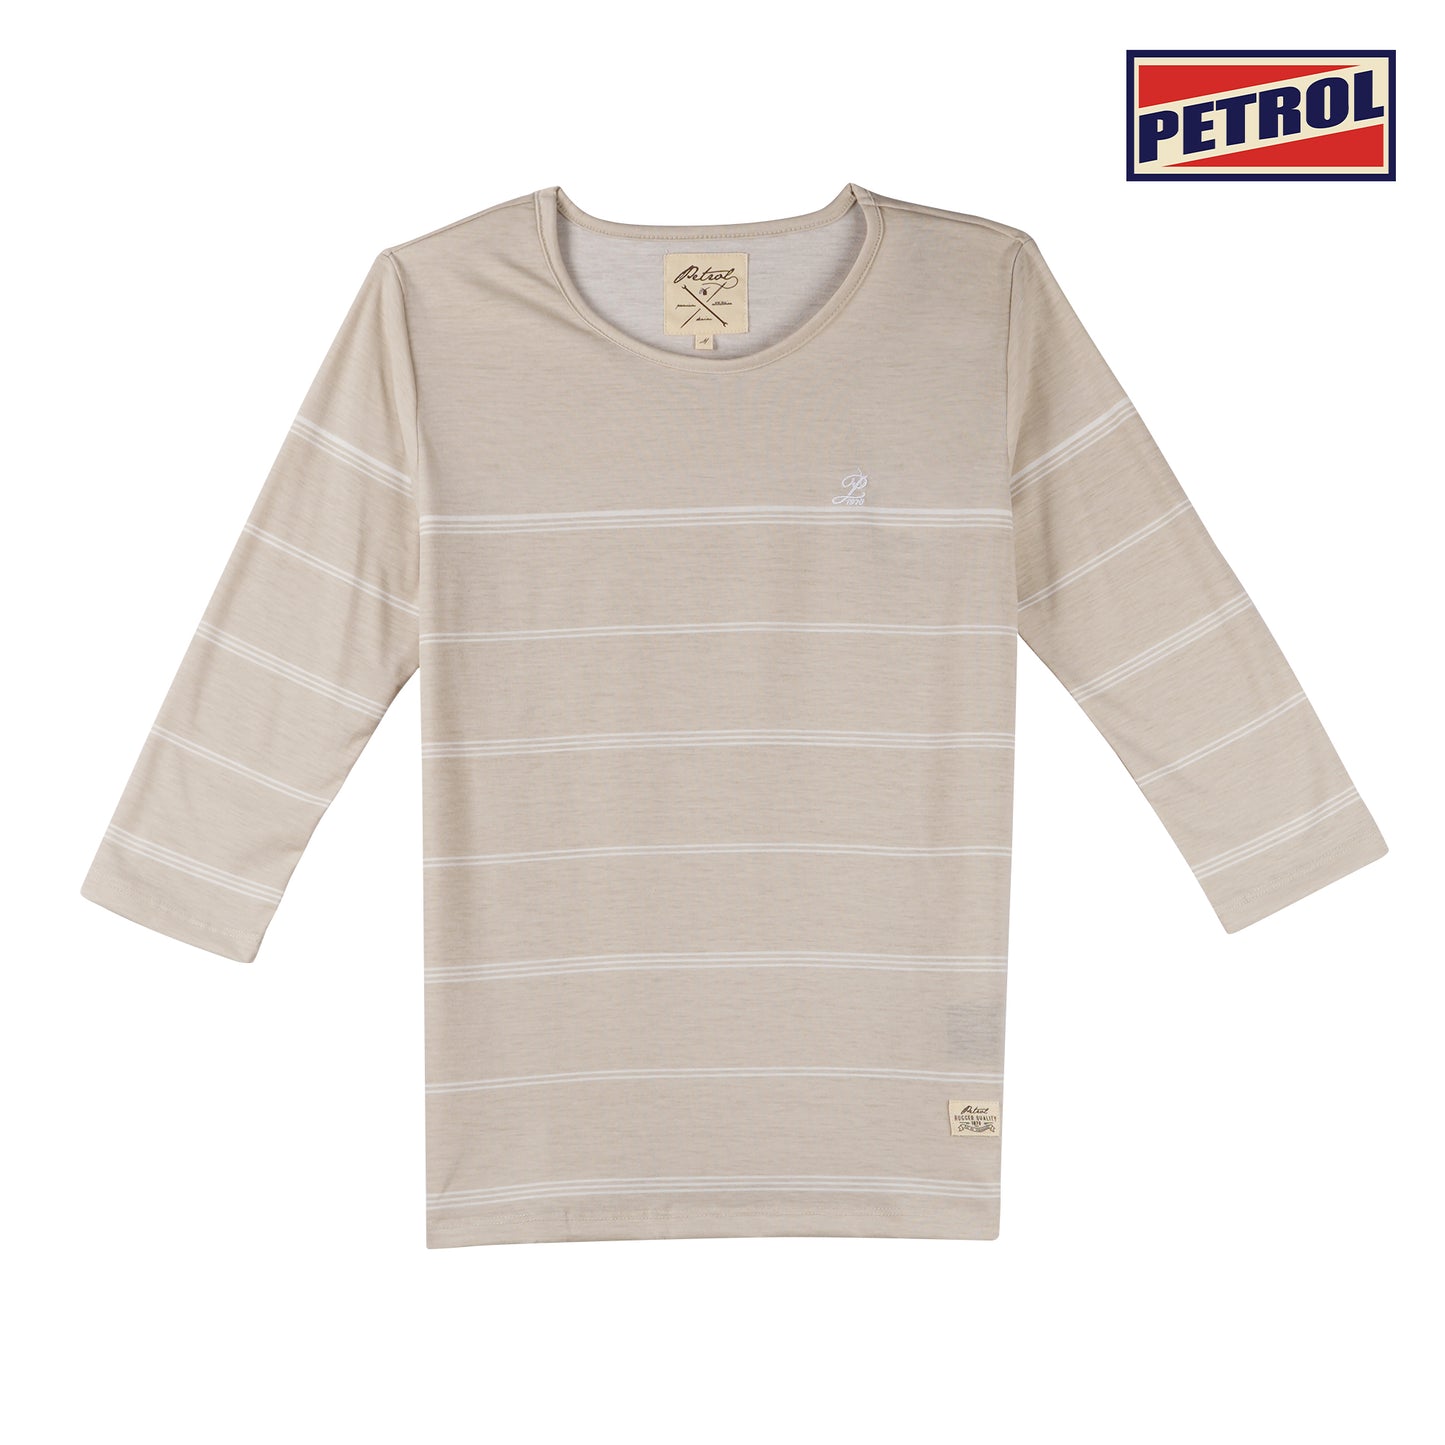 Petrol Basic Tees for Ladies Regular Fitting Shirt Trendy fashion Casual Top for Ladies 115402 (Beige)